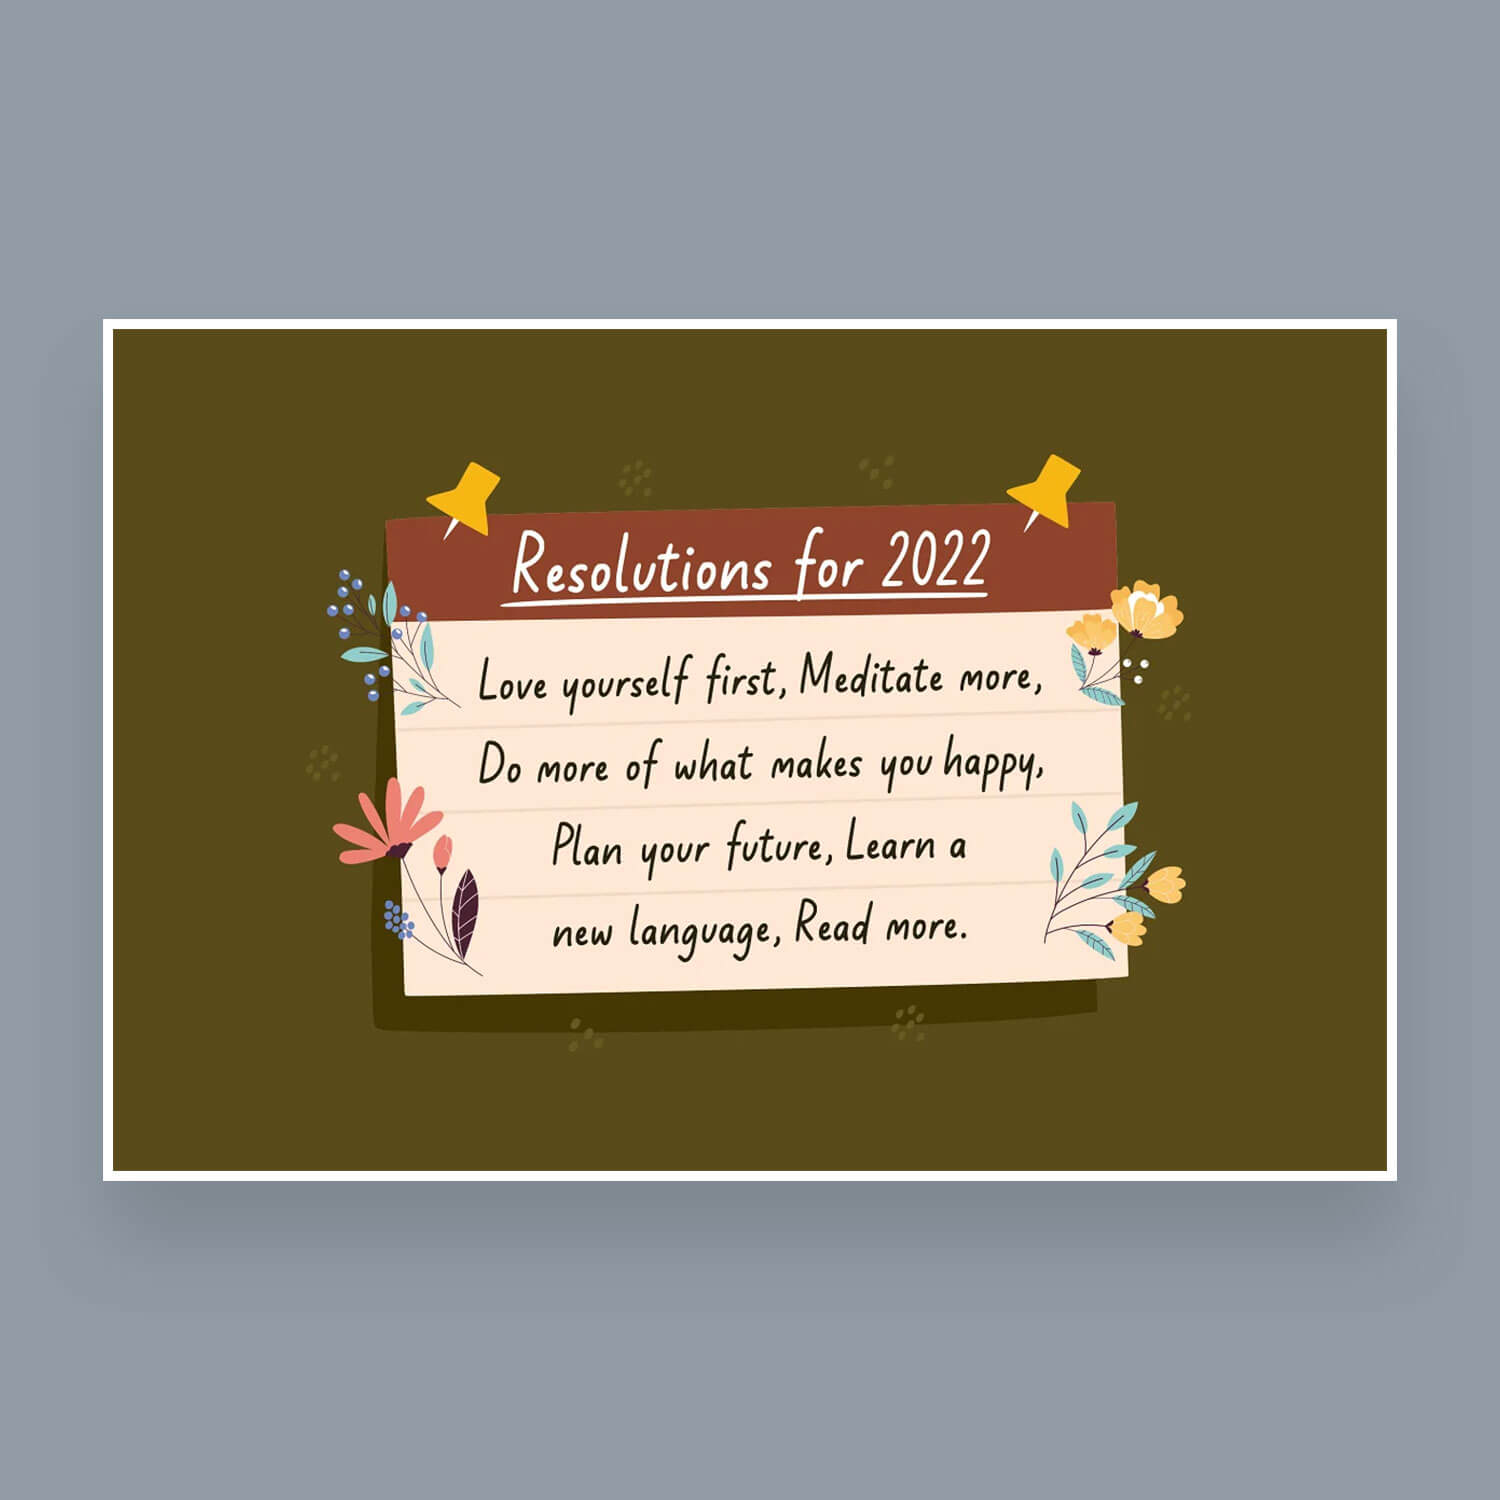 Resolutions for 2022: "Love yourself first, Meditate more, Do more of what makes you happy, Plan your future, Learn a new language, Read more."